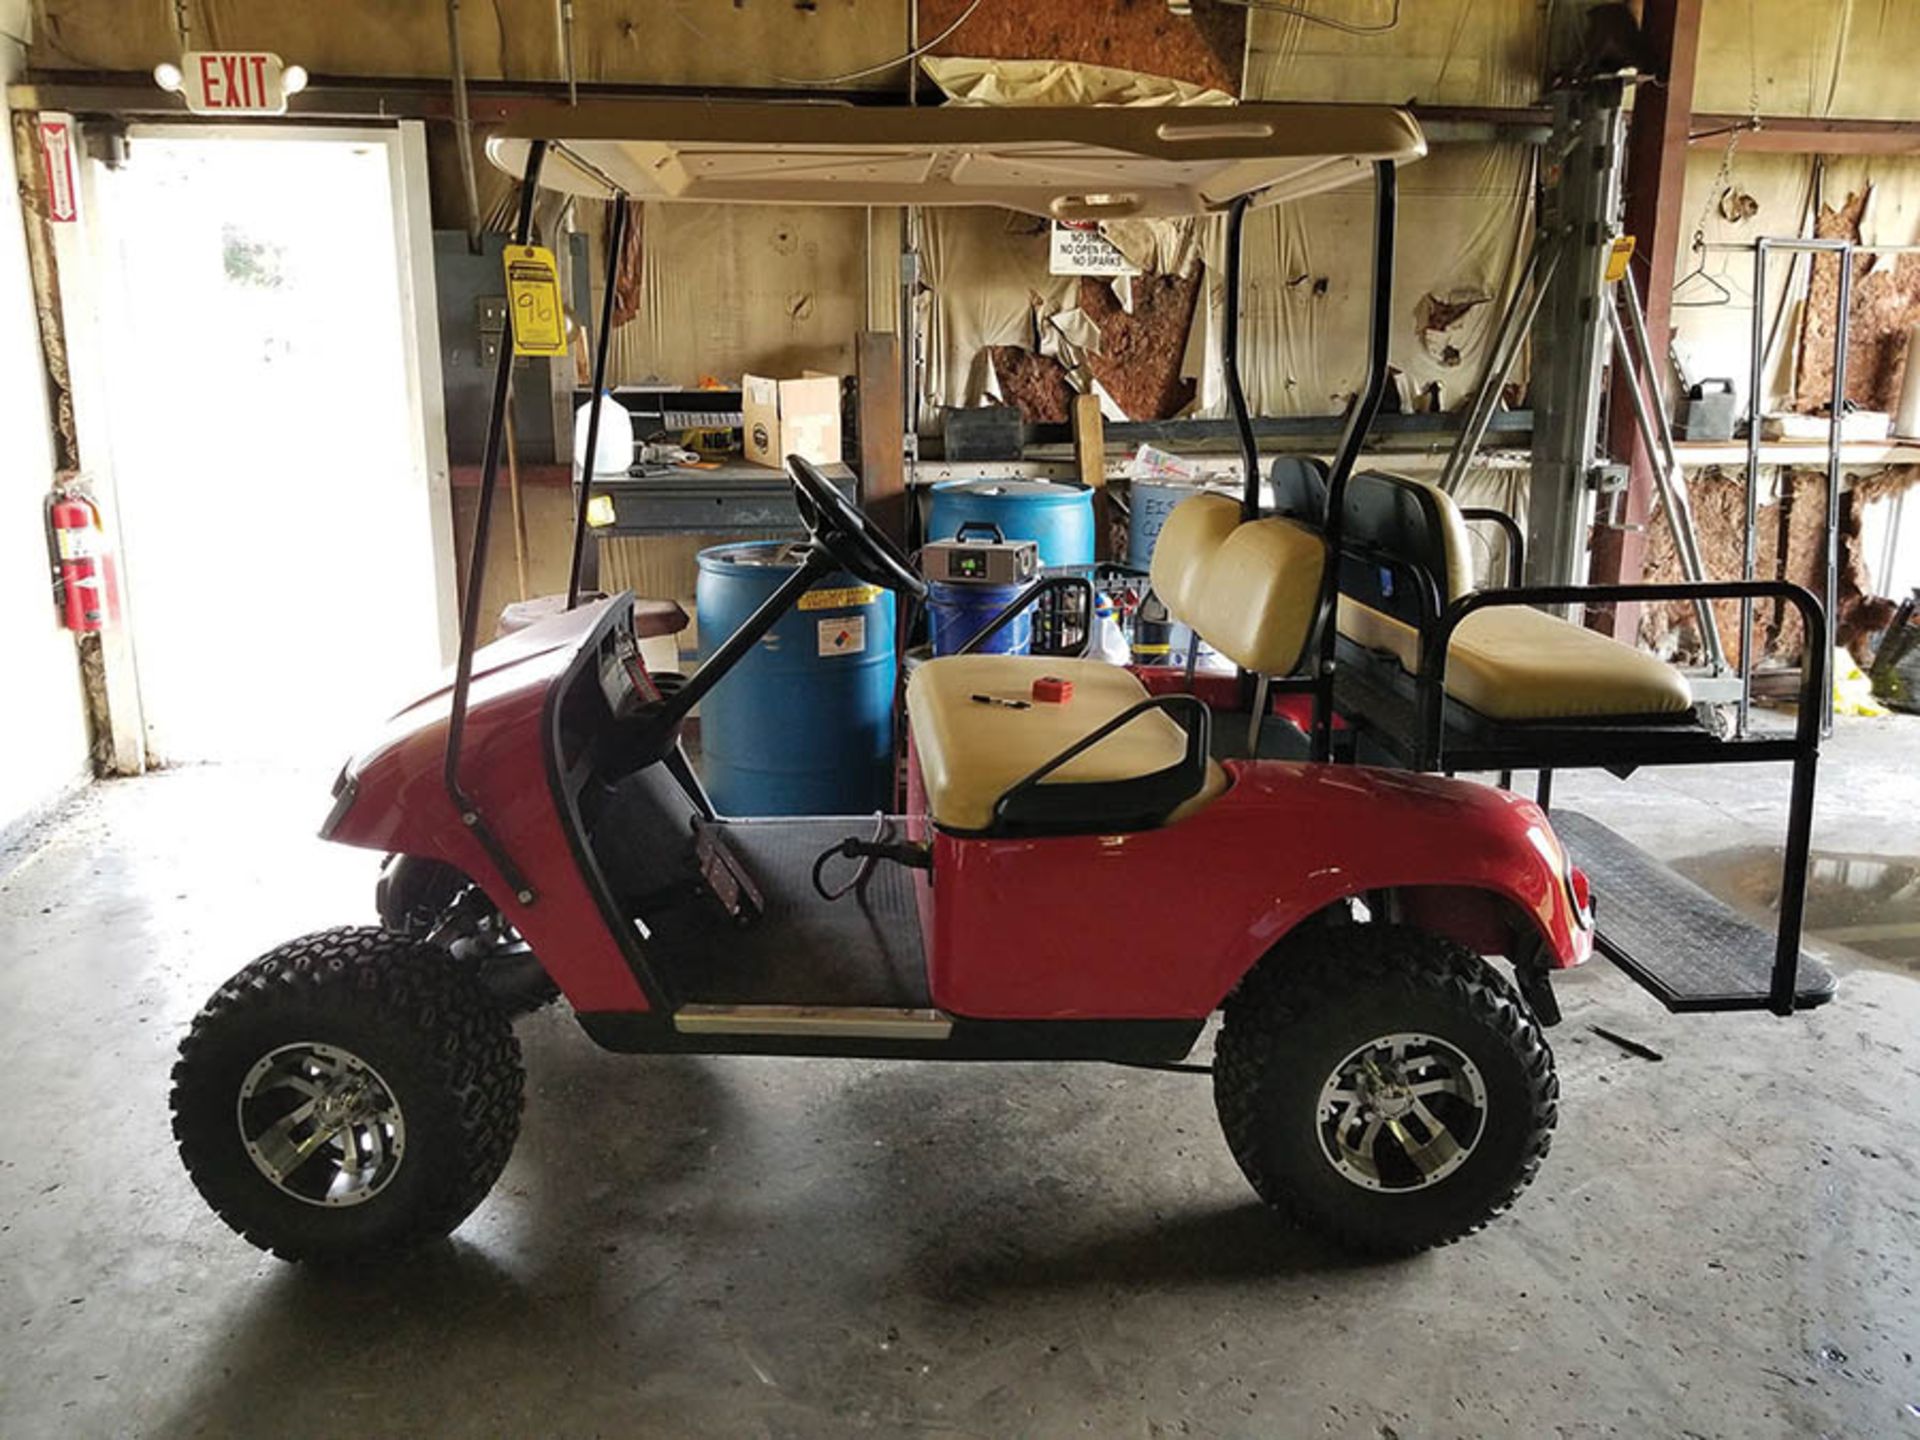 EZ-GO ELECTRIC GOLF CART; 48V WITH CHARGER, 4 PASSENGER, FOLD DOWN SEAT, LIFT KIT, HEADLIGHTS, BRAKE